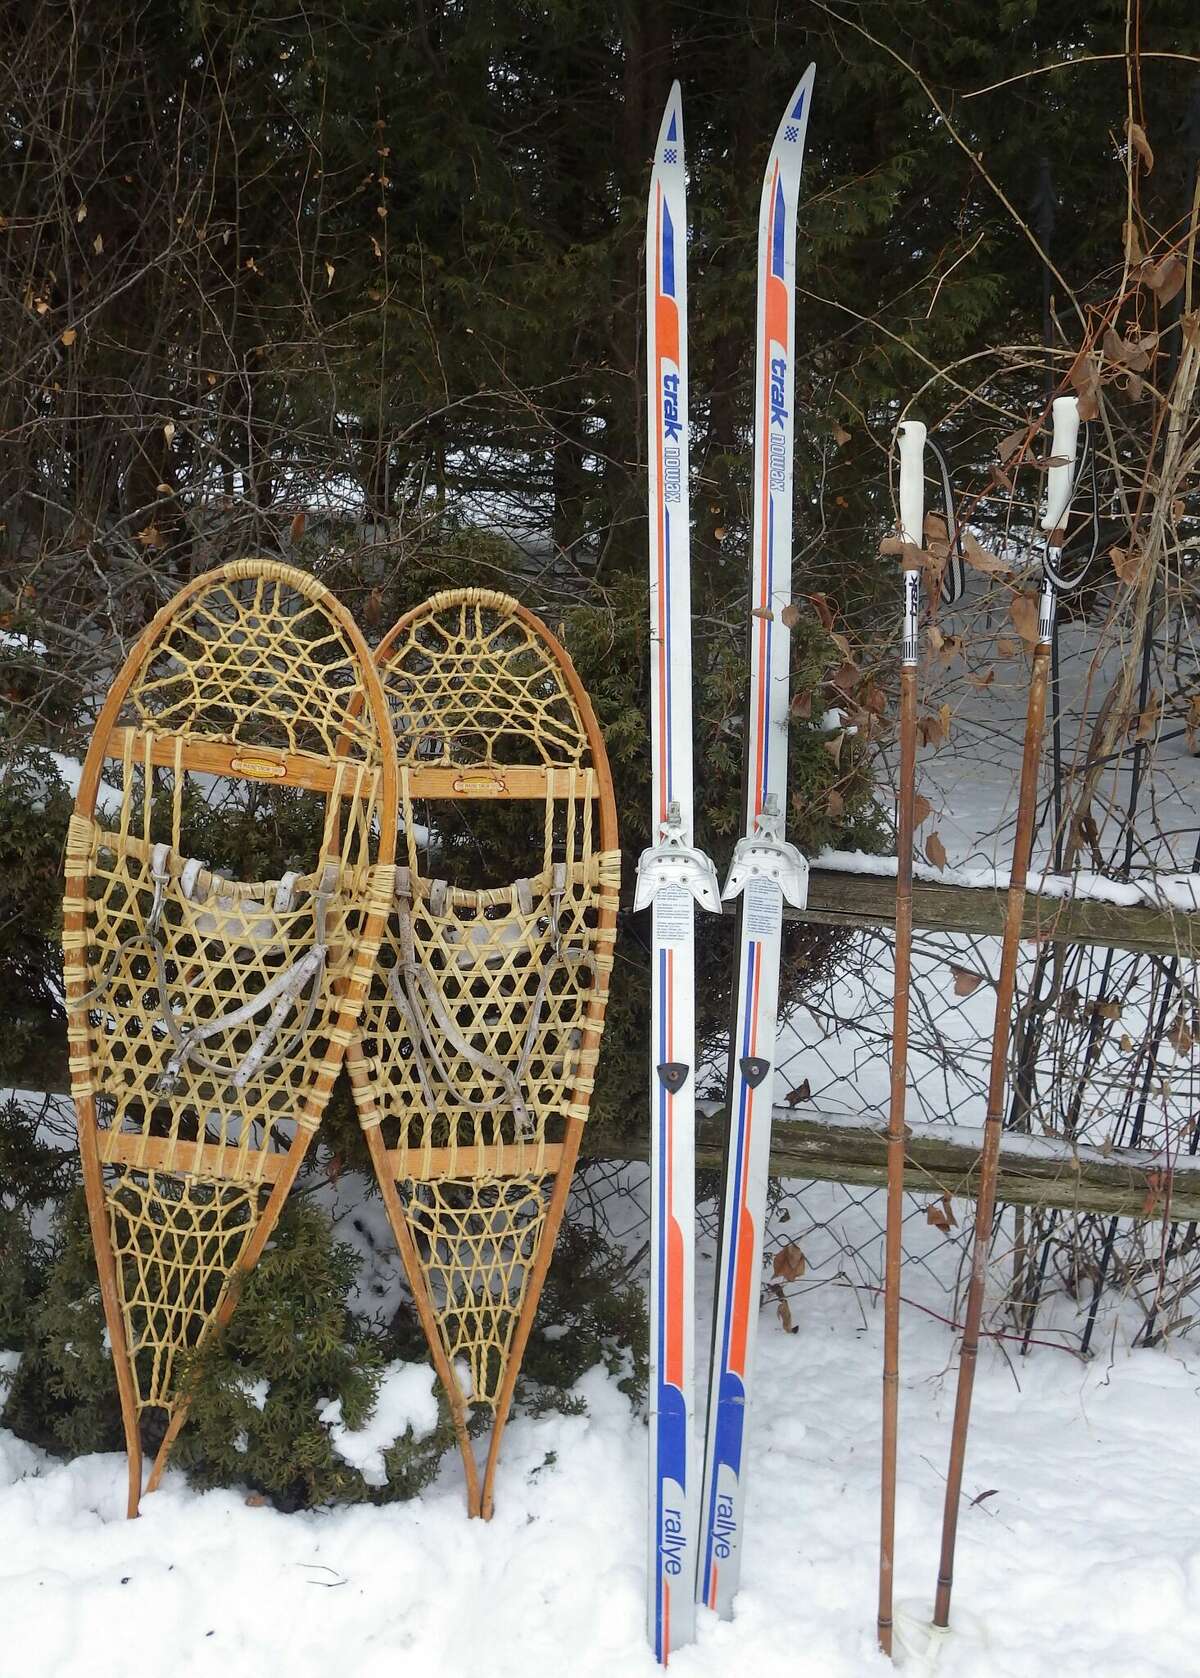 Tom Lounsbury has used the very dependable and durable rawhide and ash snowshoes (left) for many winters. The cross-country skis and poles (right) are a new outdoor adventure for him, especially if he can figure out how to come to a sudden stop without falling!